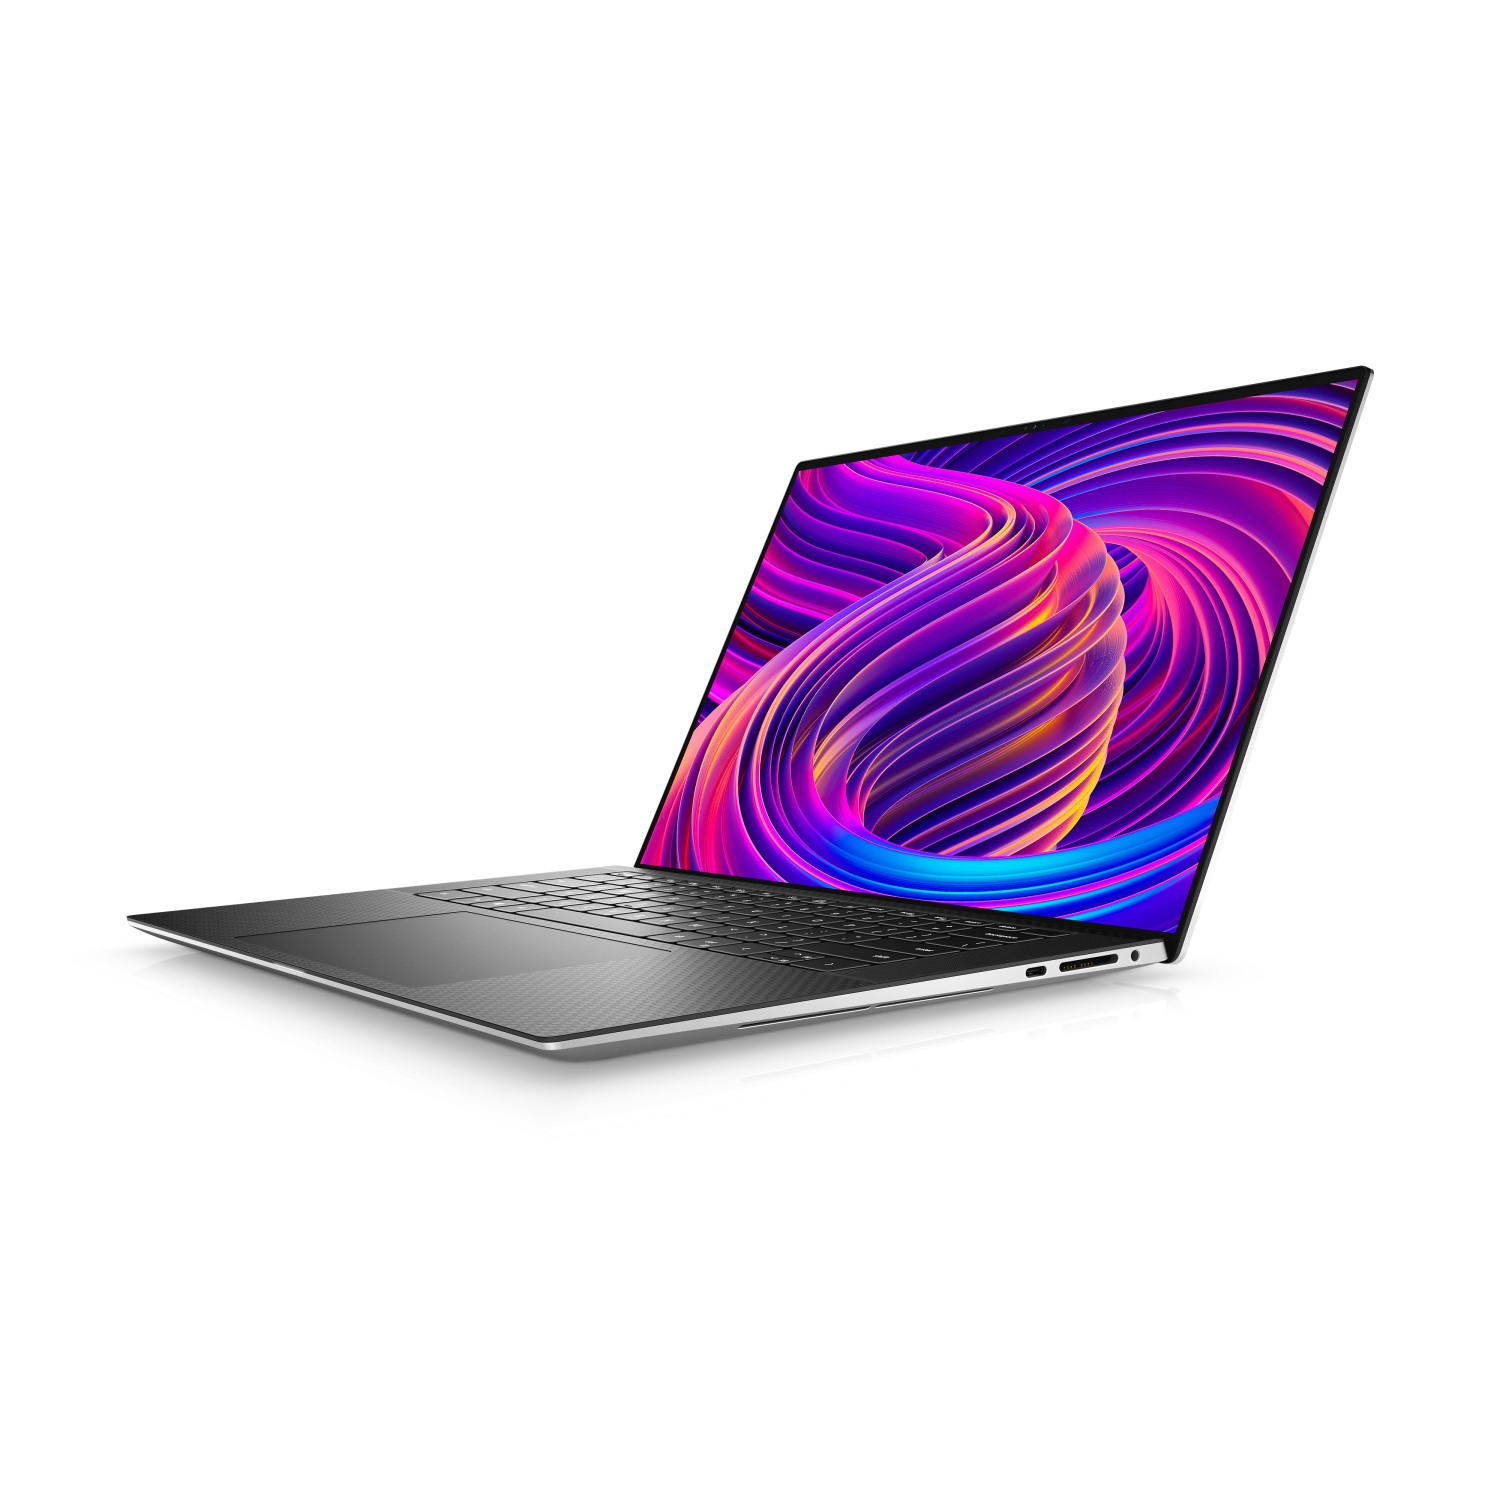 Refurbished (Excellent) – Dell XPS 9510 Laptop (2021) | 15.6" FHD+ | Core i7 - 512GB SSD - 16GB RAM - 3050 Ti | 8 Cores @ 4.6 GHz - 11th Gen CPU